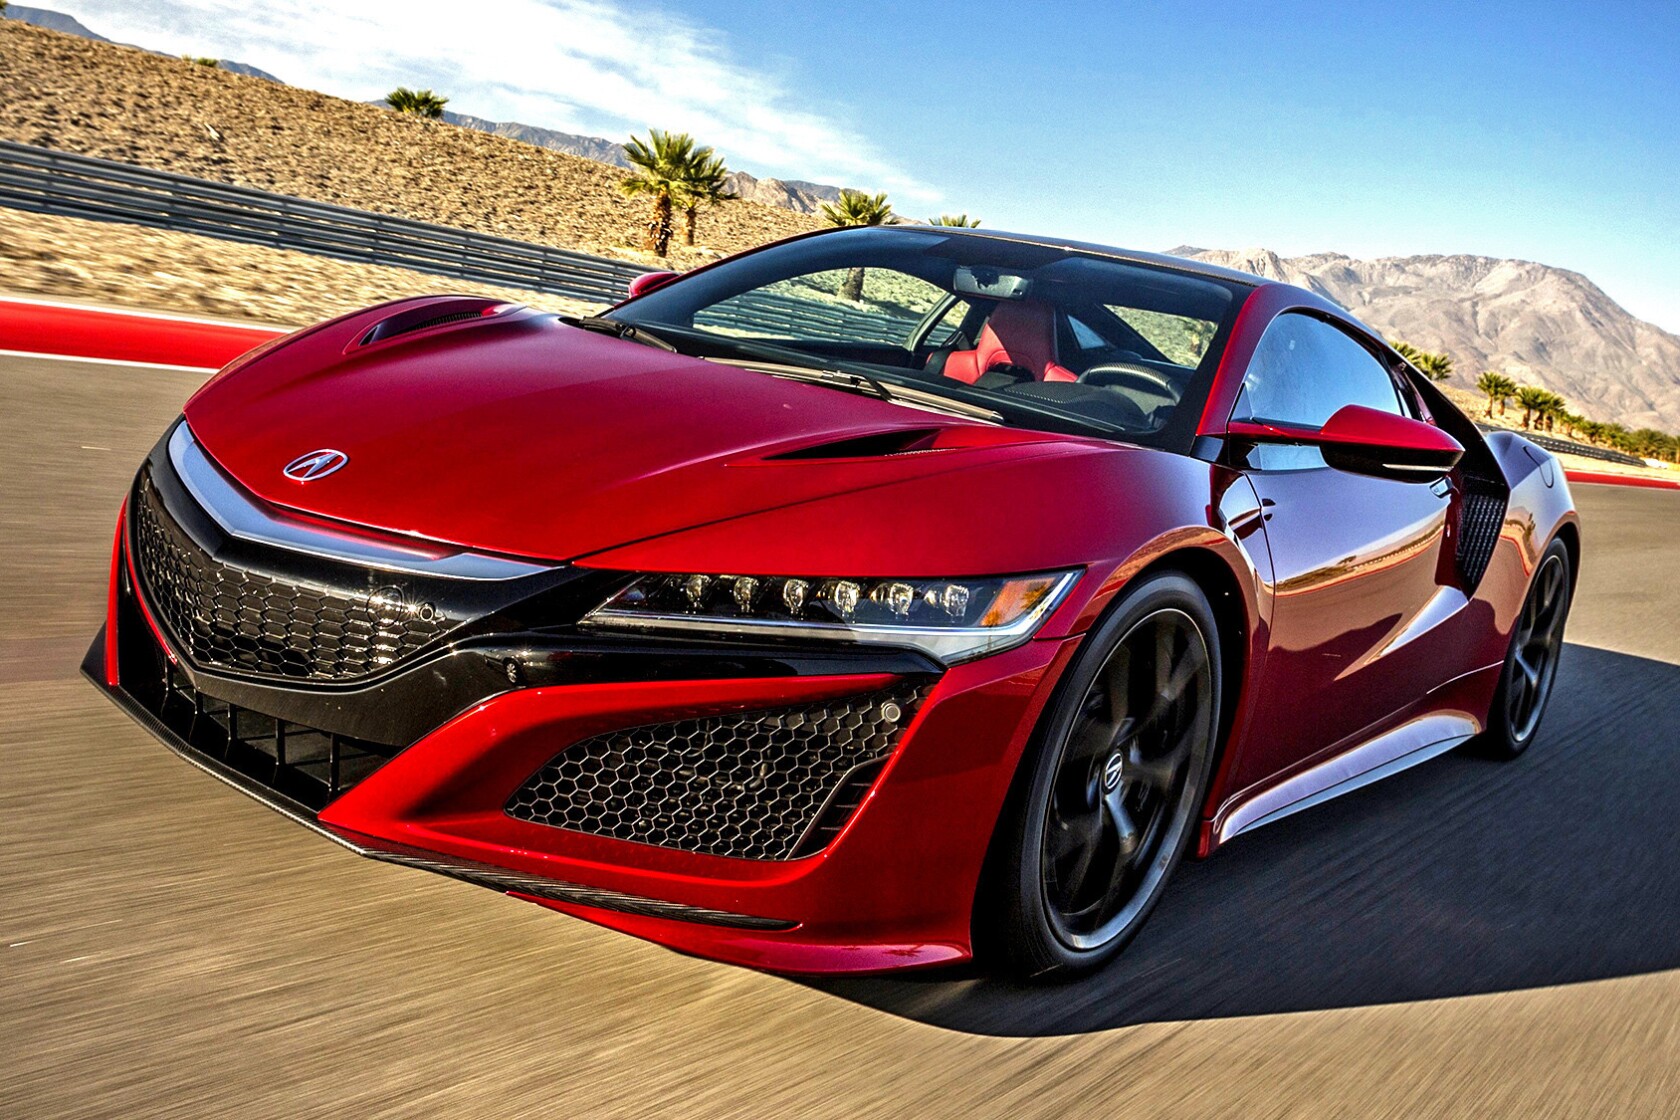 2017 Acura NSX: The only true all-American supercar? - Los Angeles Times